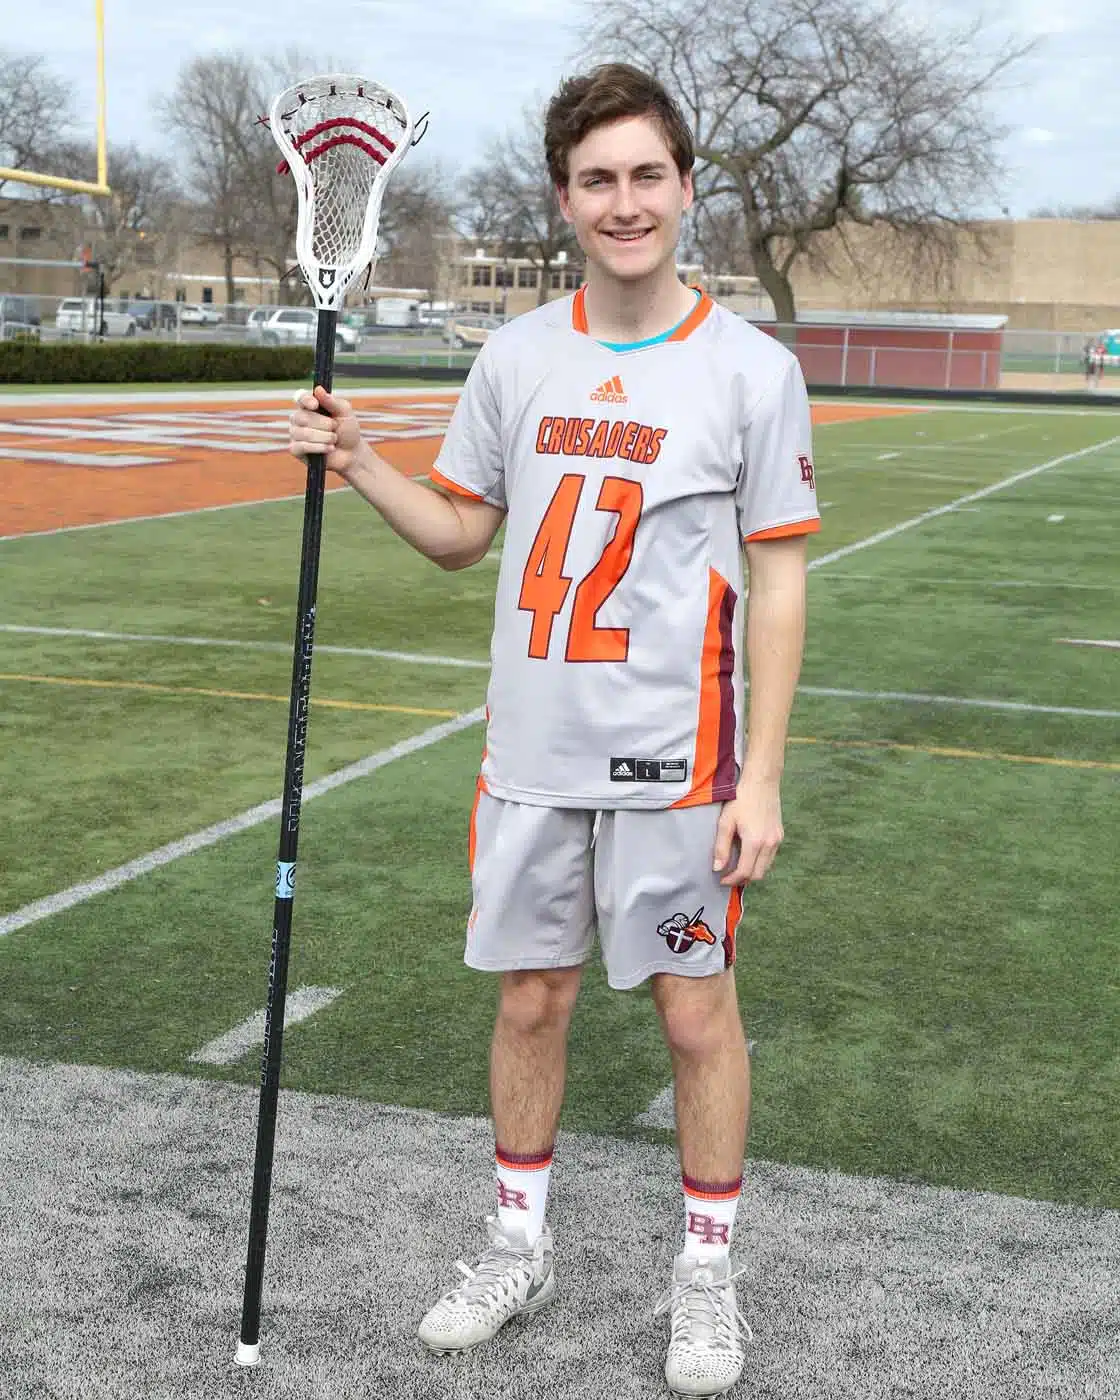 Crusaders Lacrosse player sport team by Tom Killoran Photography